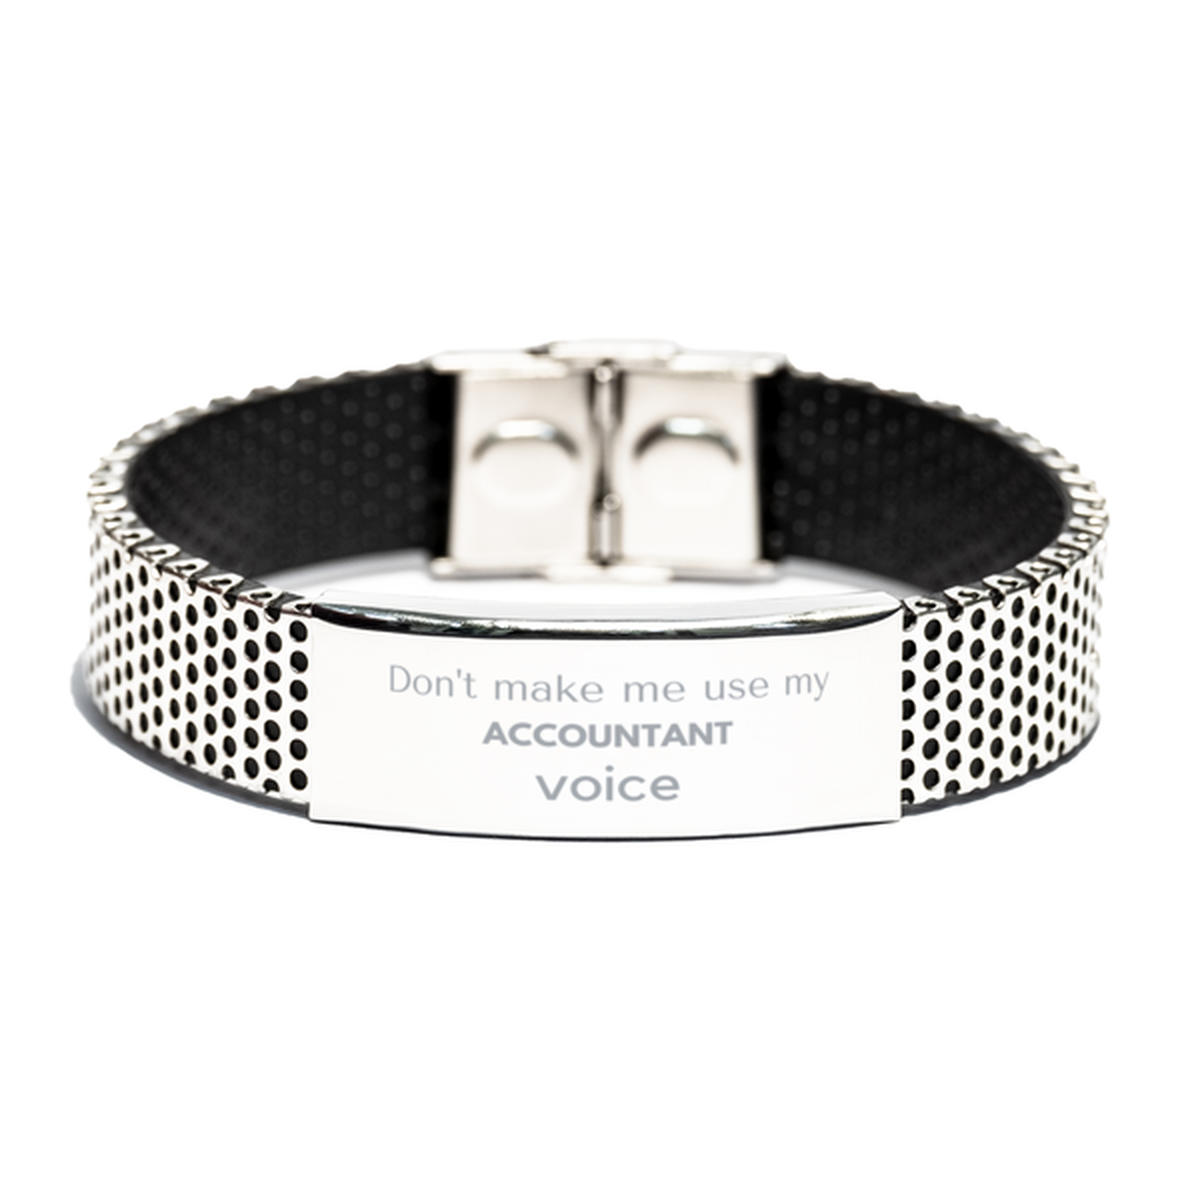 Don't make me use my Accountant voice, Sarcasm Accountant Gifts, Christmas Accountant Stainless Steel Bracelet Birthday Unique Gifts For Accountant Coworkers, Men, Women, Colleague, Friends